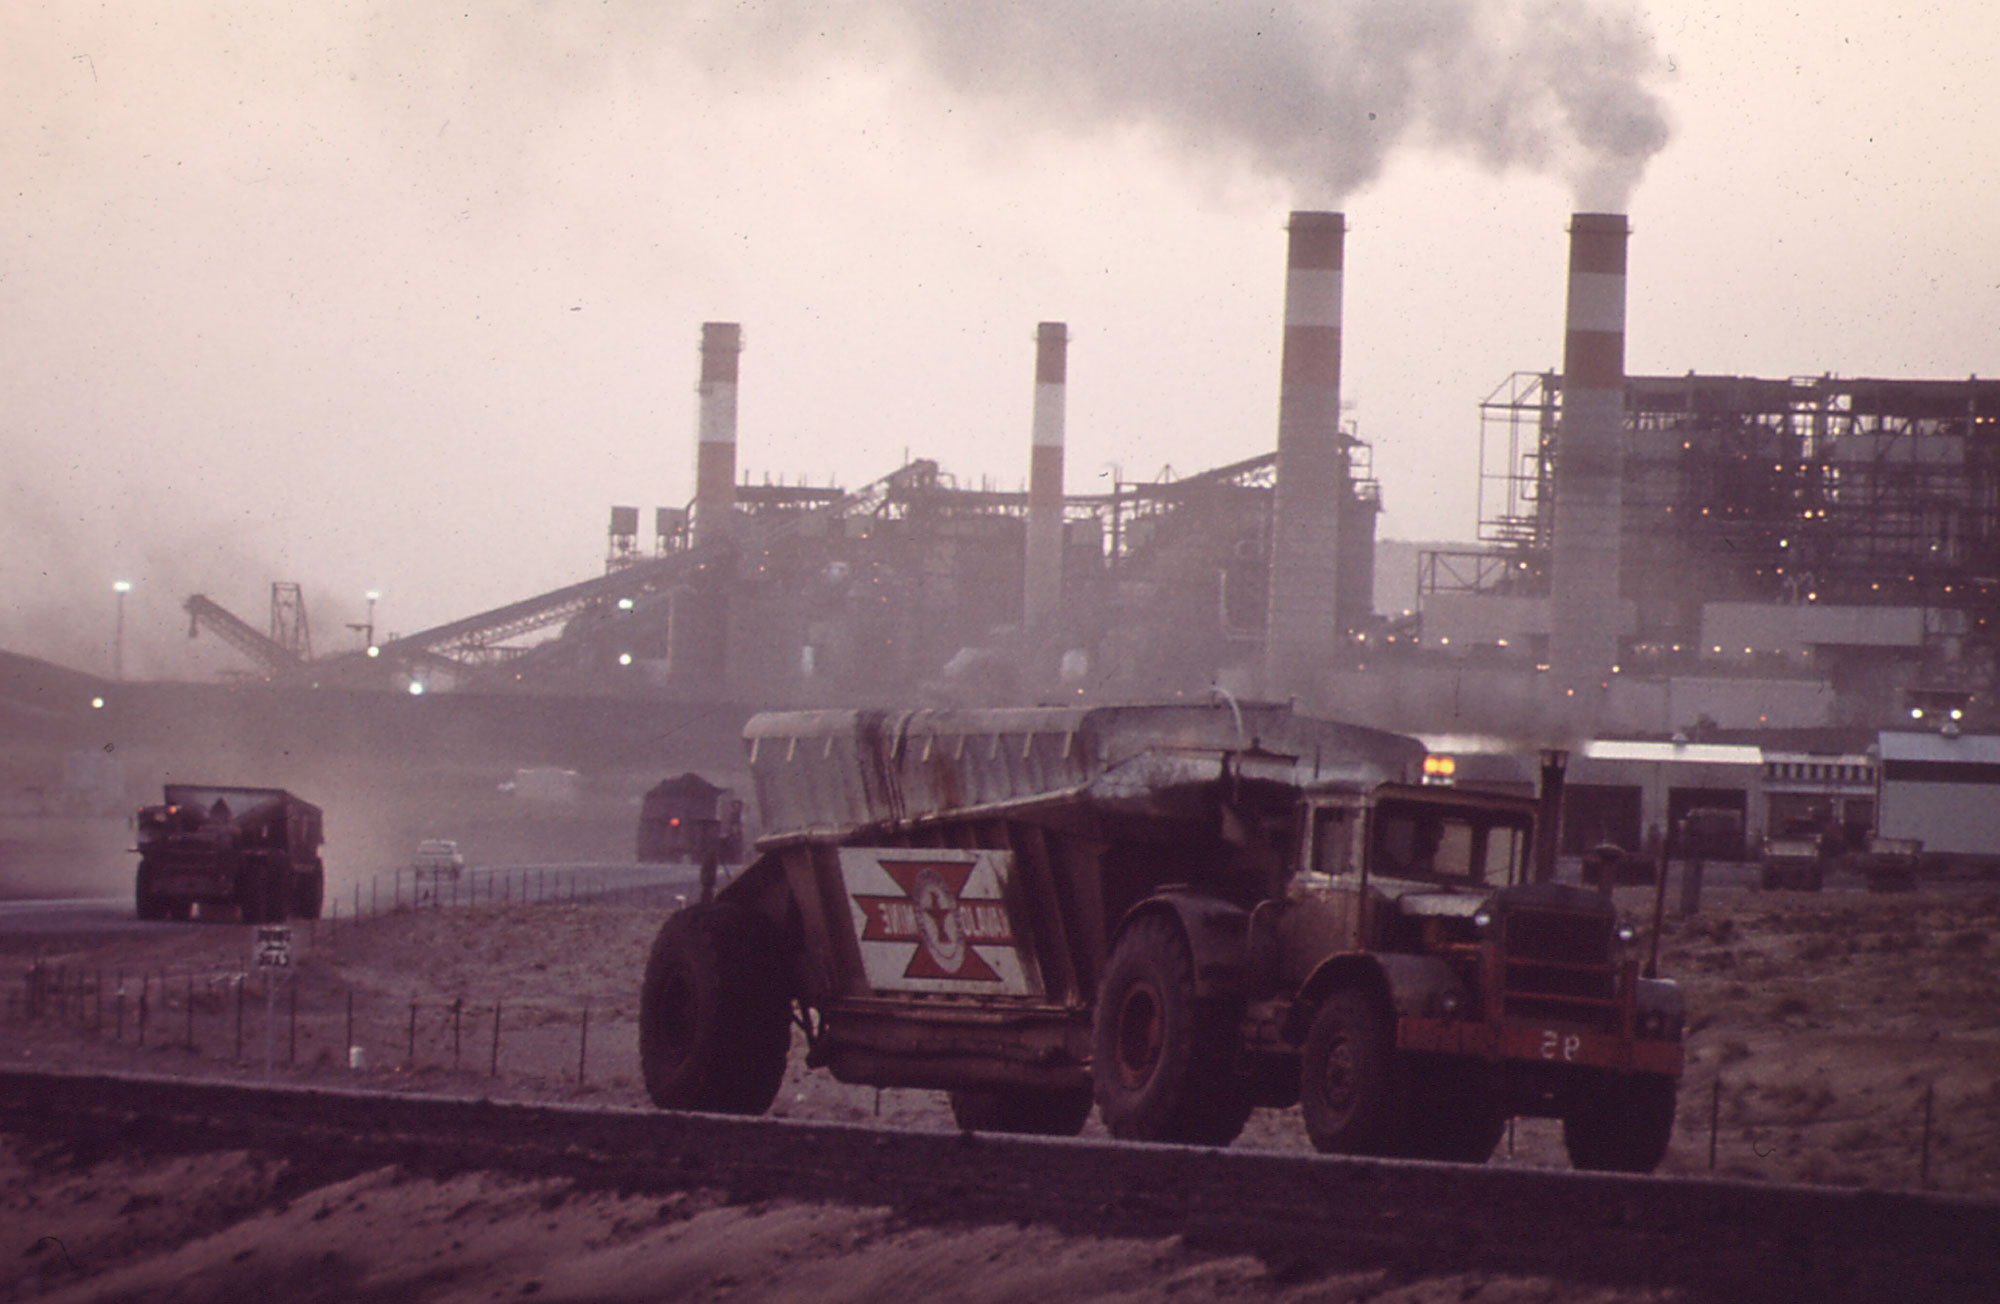 Photo showing four smokestacks and other structures of the Four Corners Generating Plant in the background, with trucks transporting coal to the plant and an empty truck driving away. The whole scene appears smoky from the plant emissions.